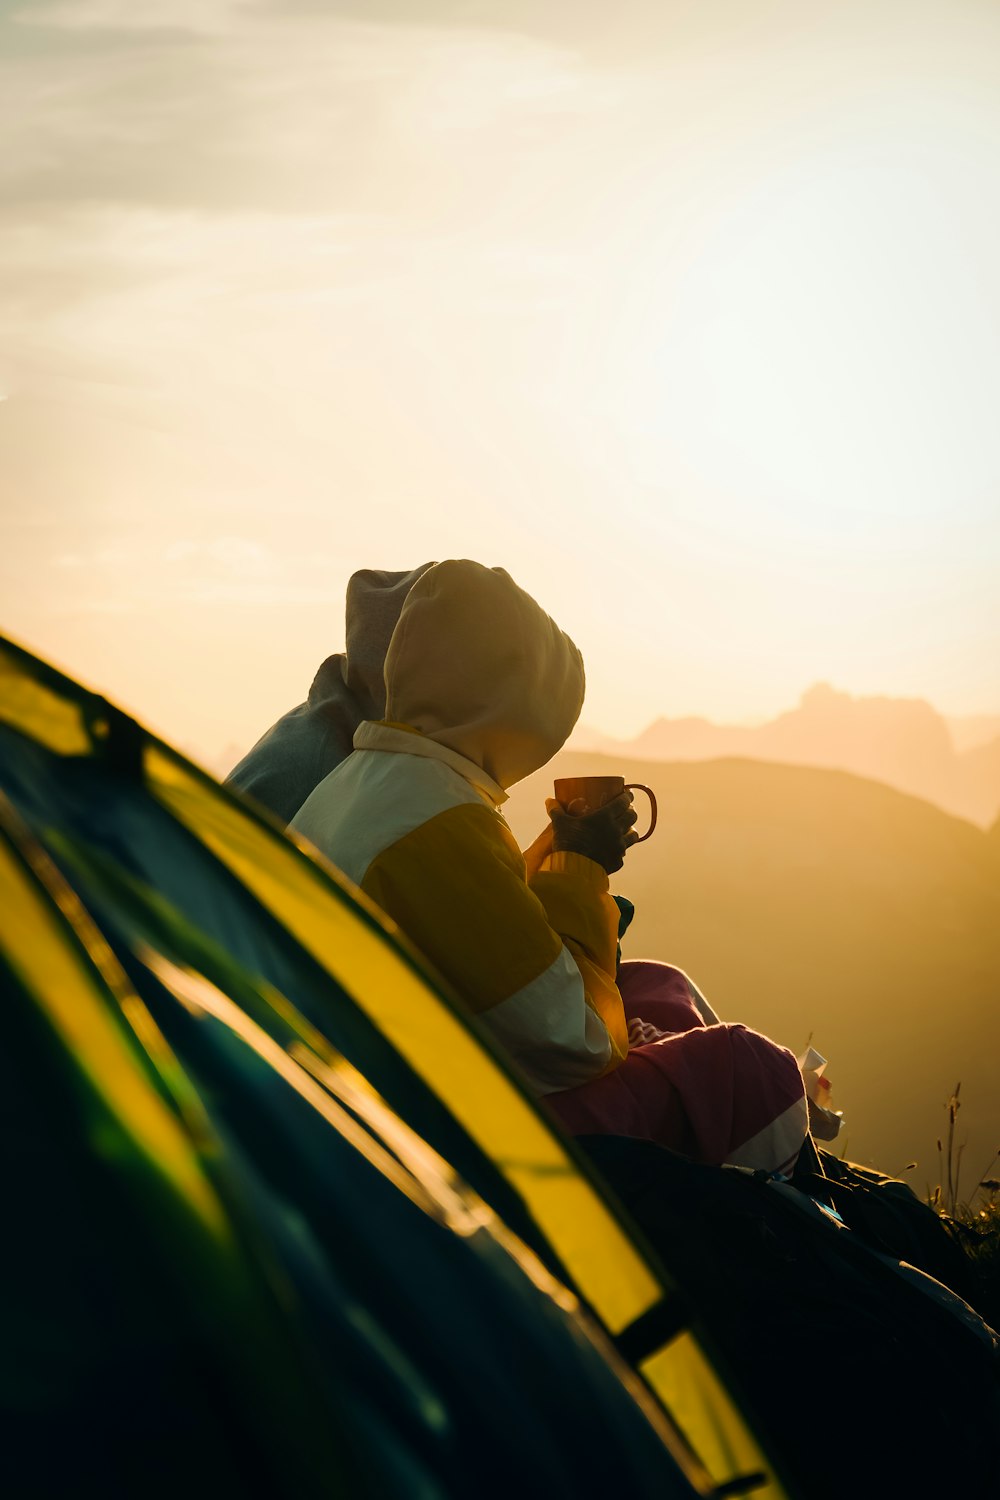 man and woman sitting on yellow and black car during sunset